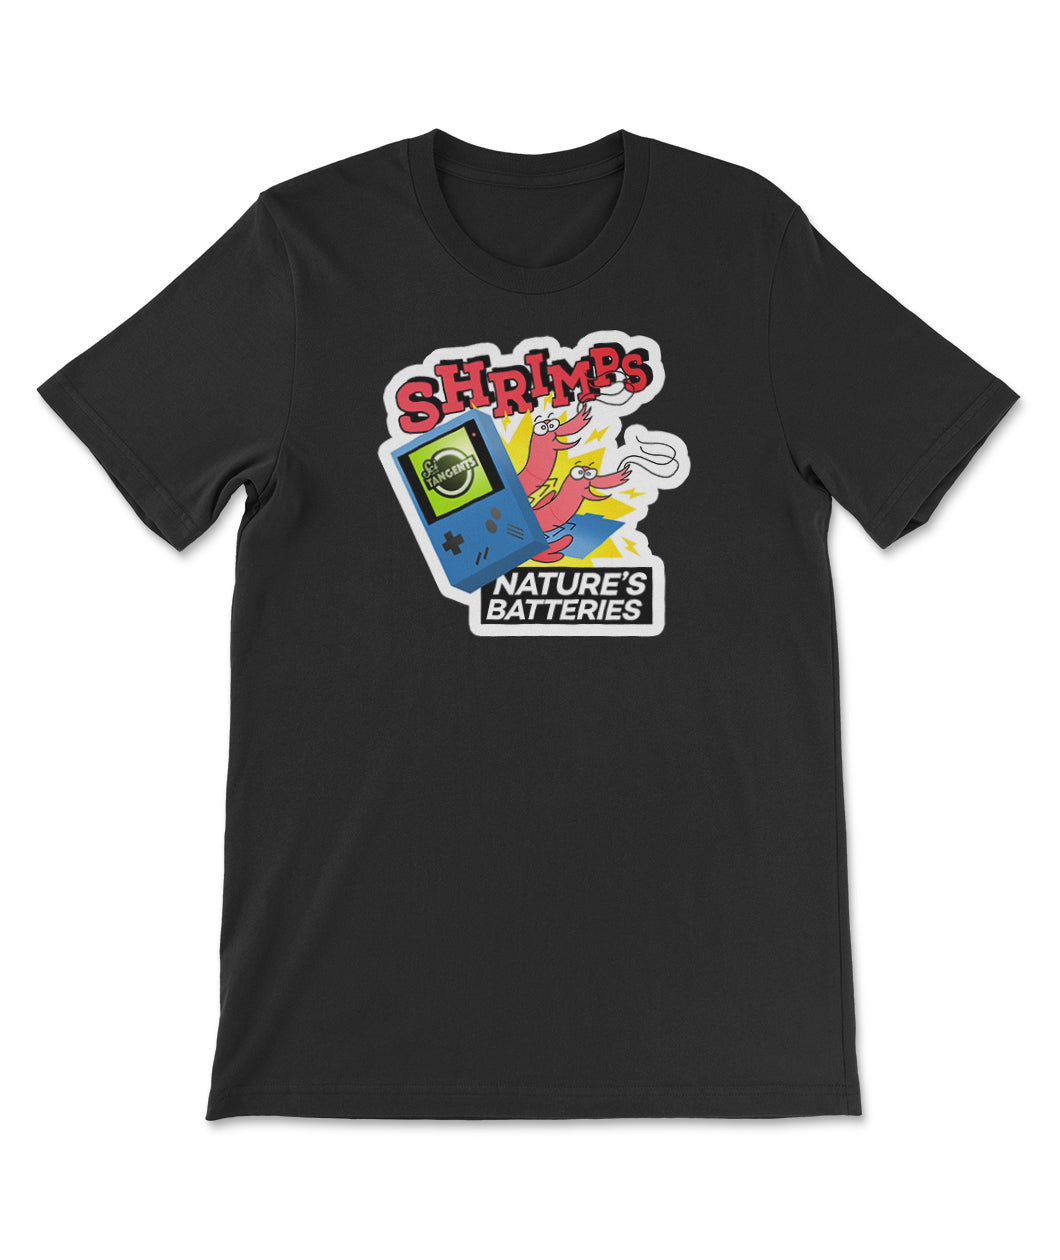  A black t-shirt with a print on the front of a MP3 player with the Scishow Tangents podcast playing and two shrimp popping out behind it. The text on the shirt reads 